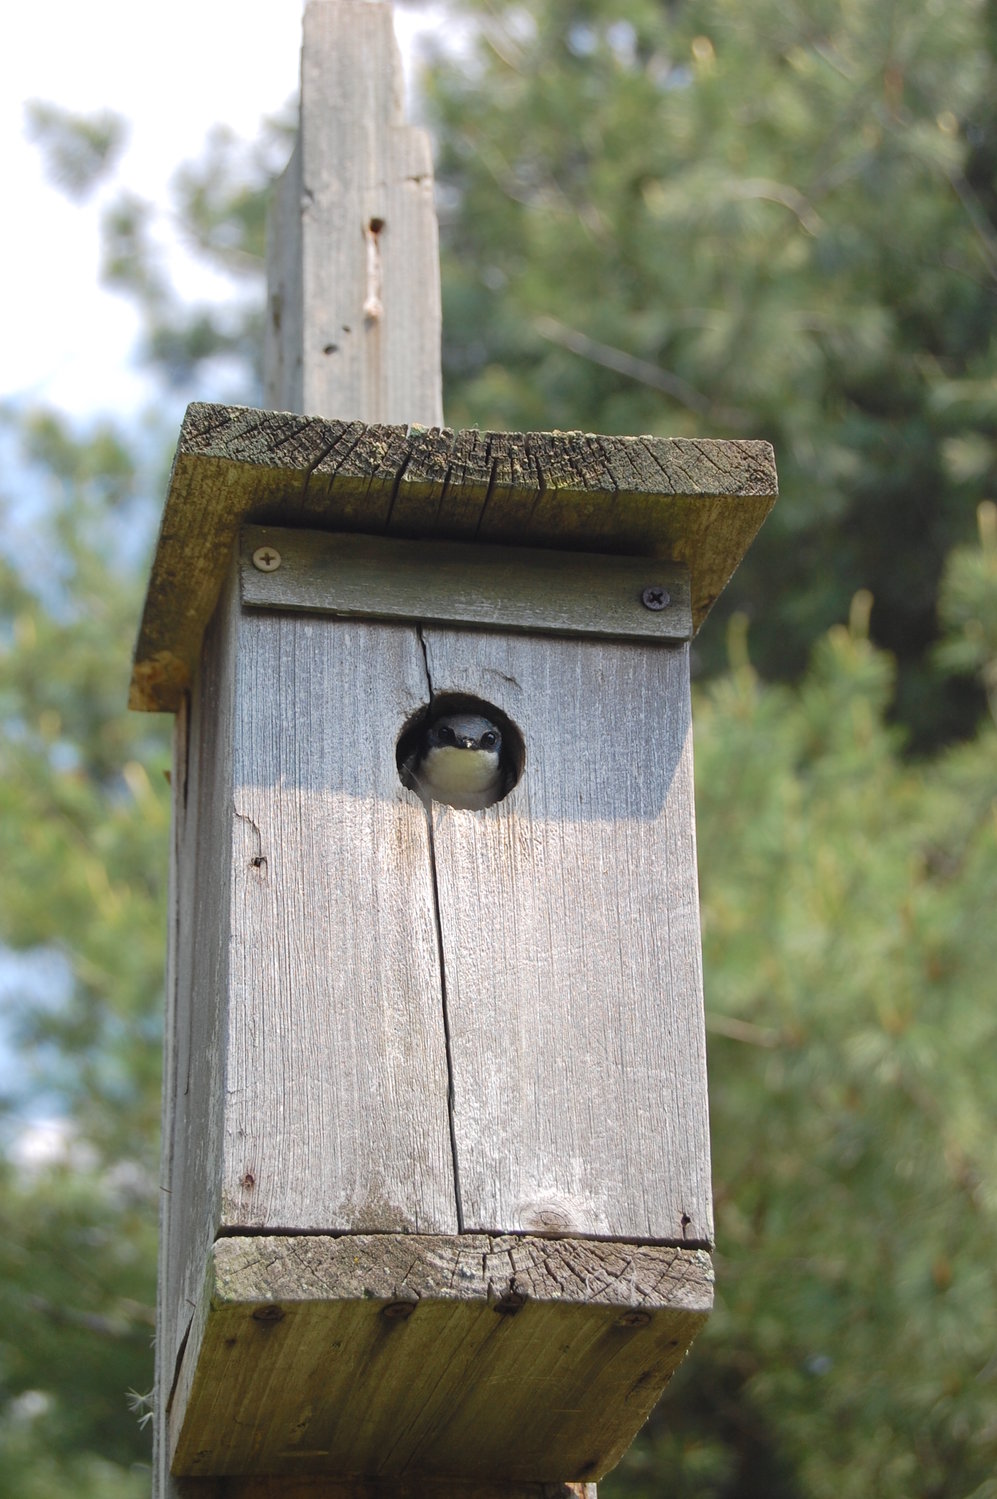 An adult female tree swallow peers from a nesting box. Females feature brownish-gray feathers tinged with blue-green tones above and white feathers below. They typically nest in holes in trees as well as artificial nest boxes, often in the vicinity of water.